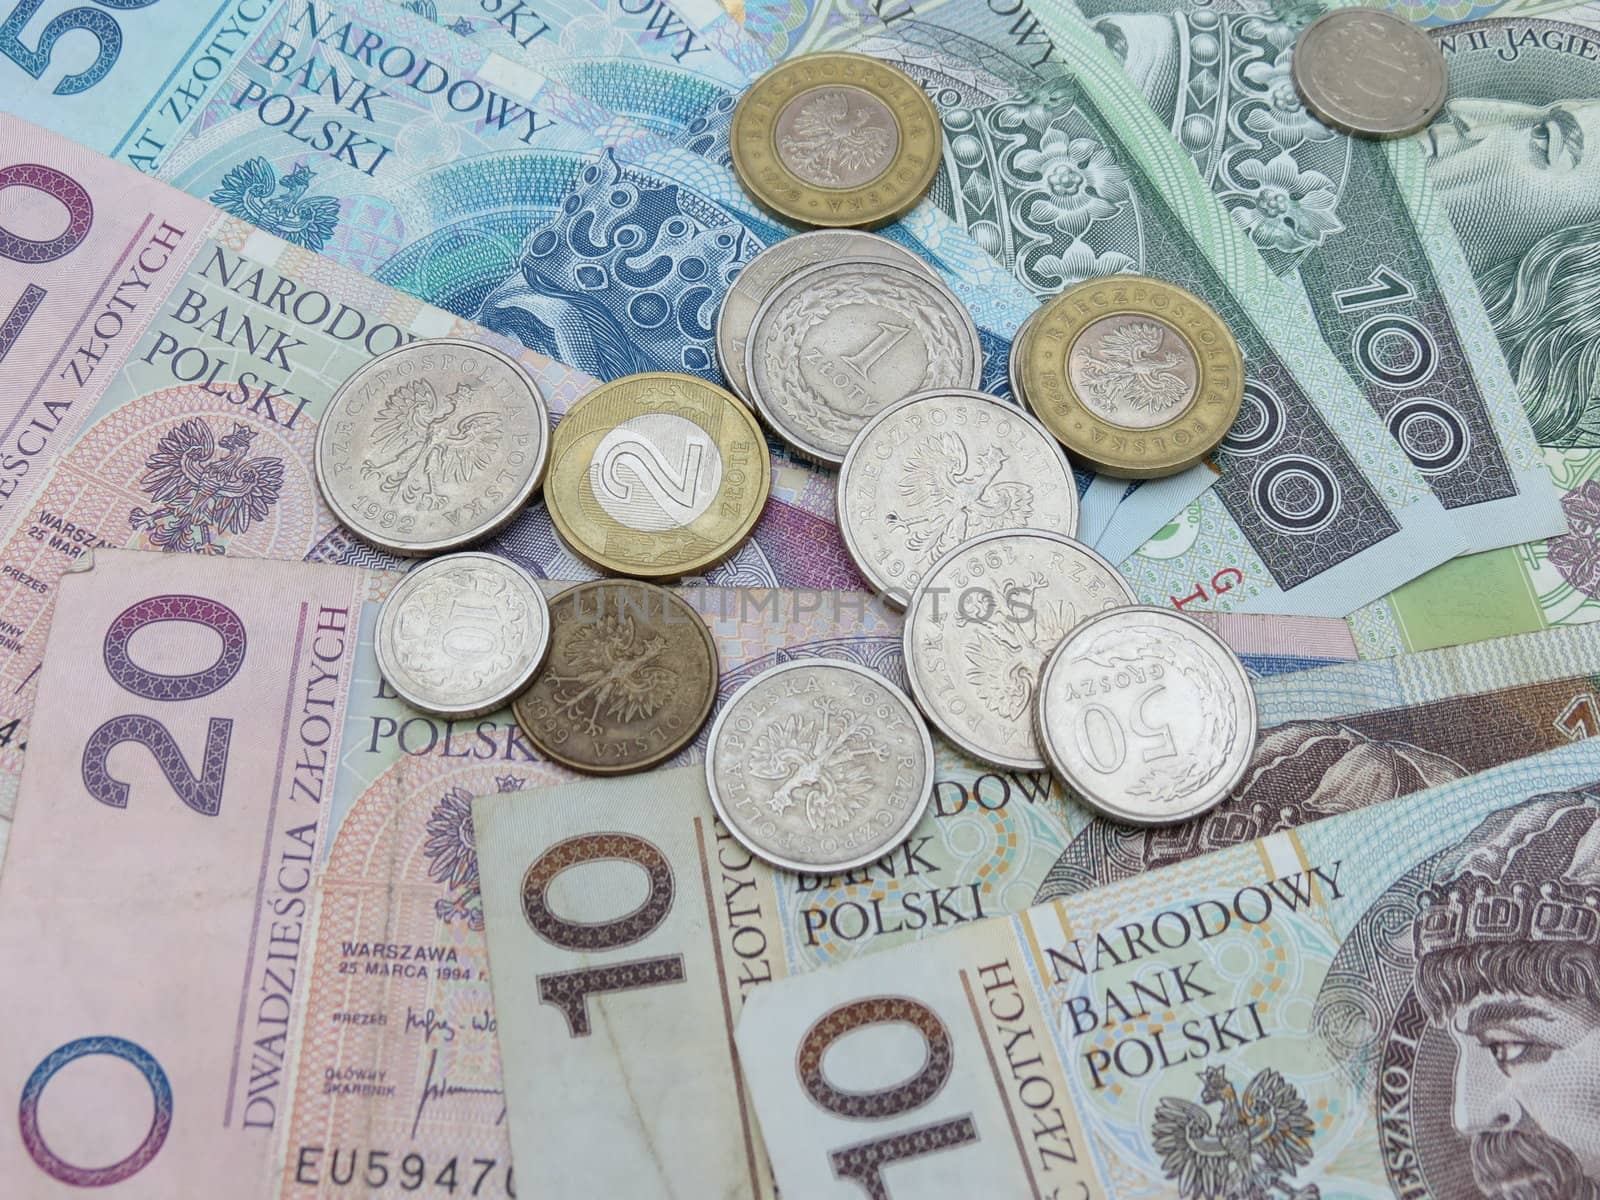 Polish zloty (PLN) currency - banknotes and coins